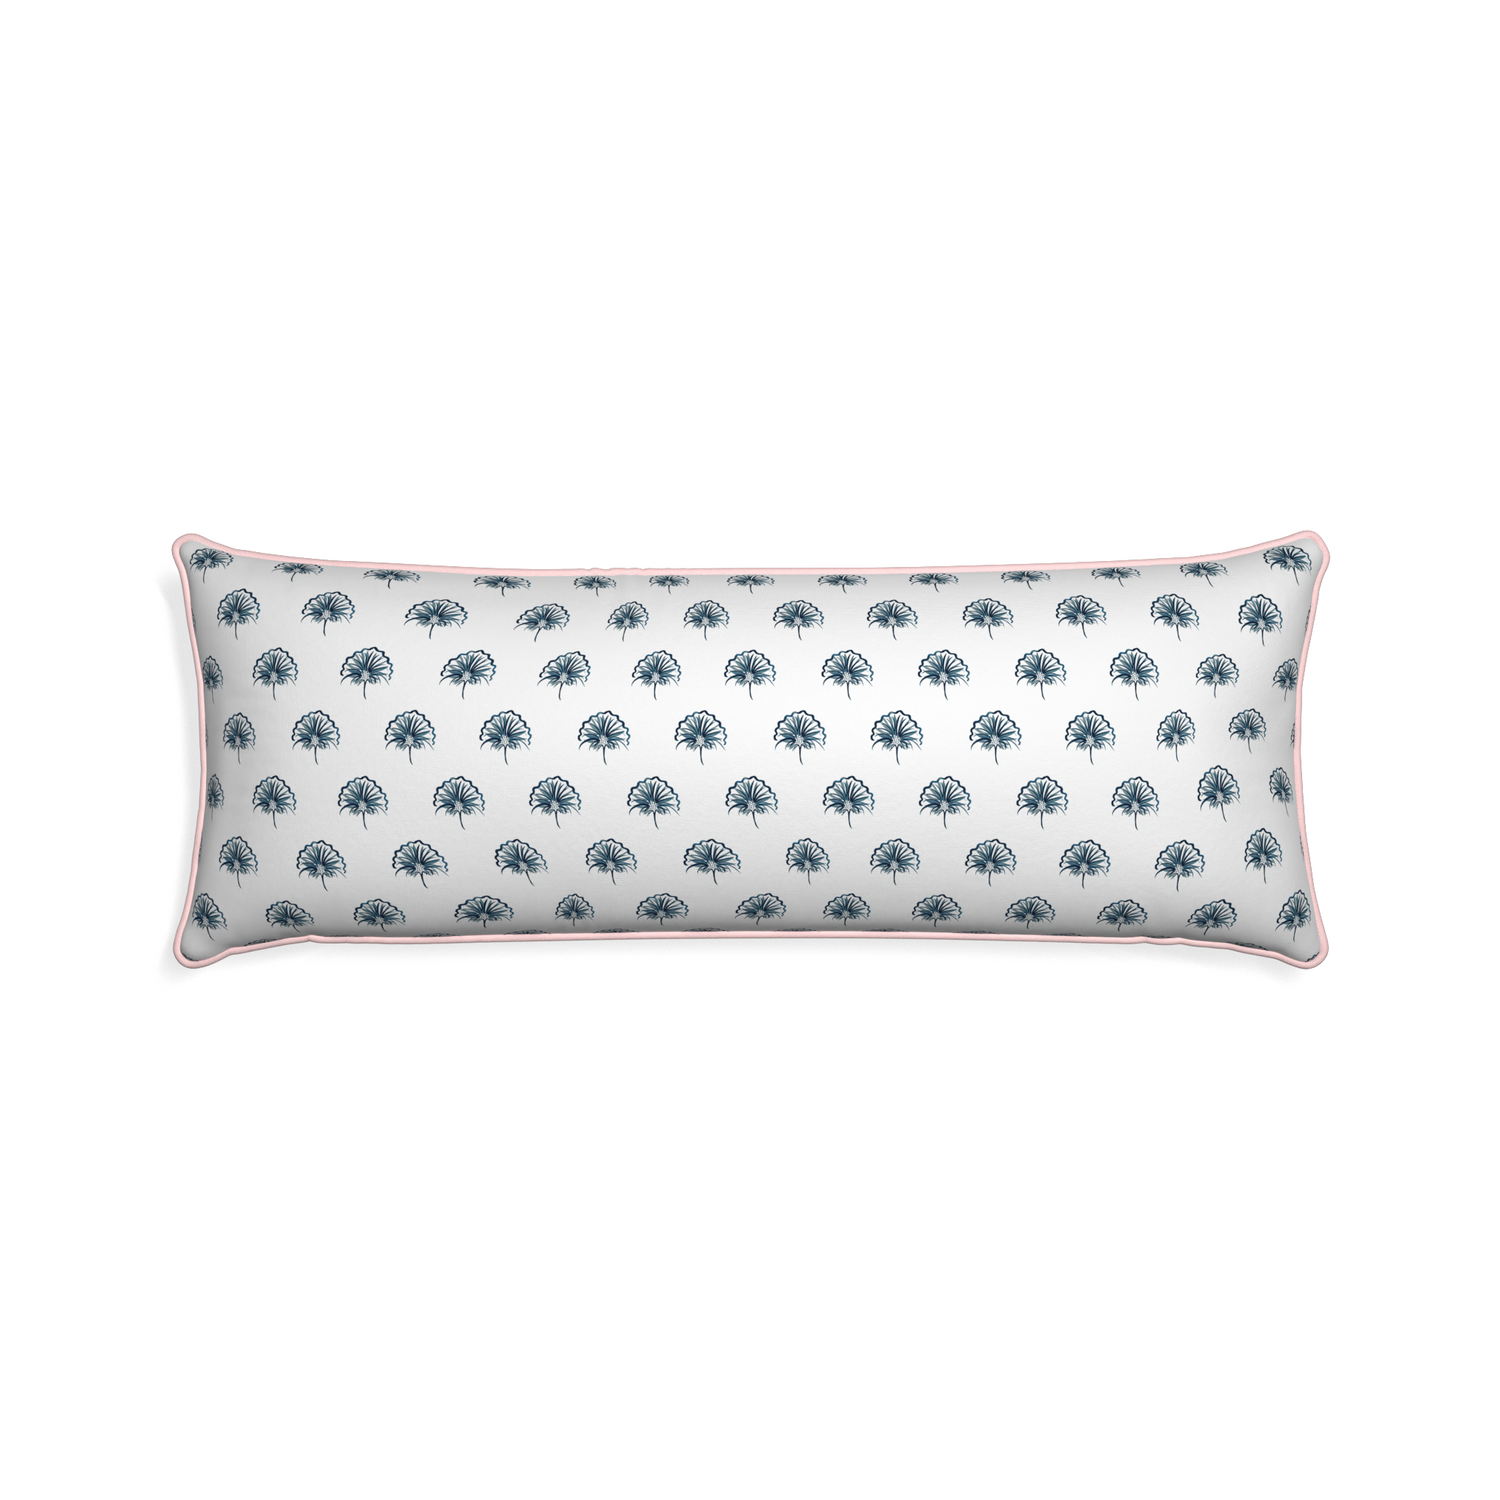 Xl-lumbar penelope midnight custom pillow with petal piping on white background